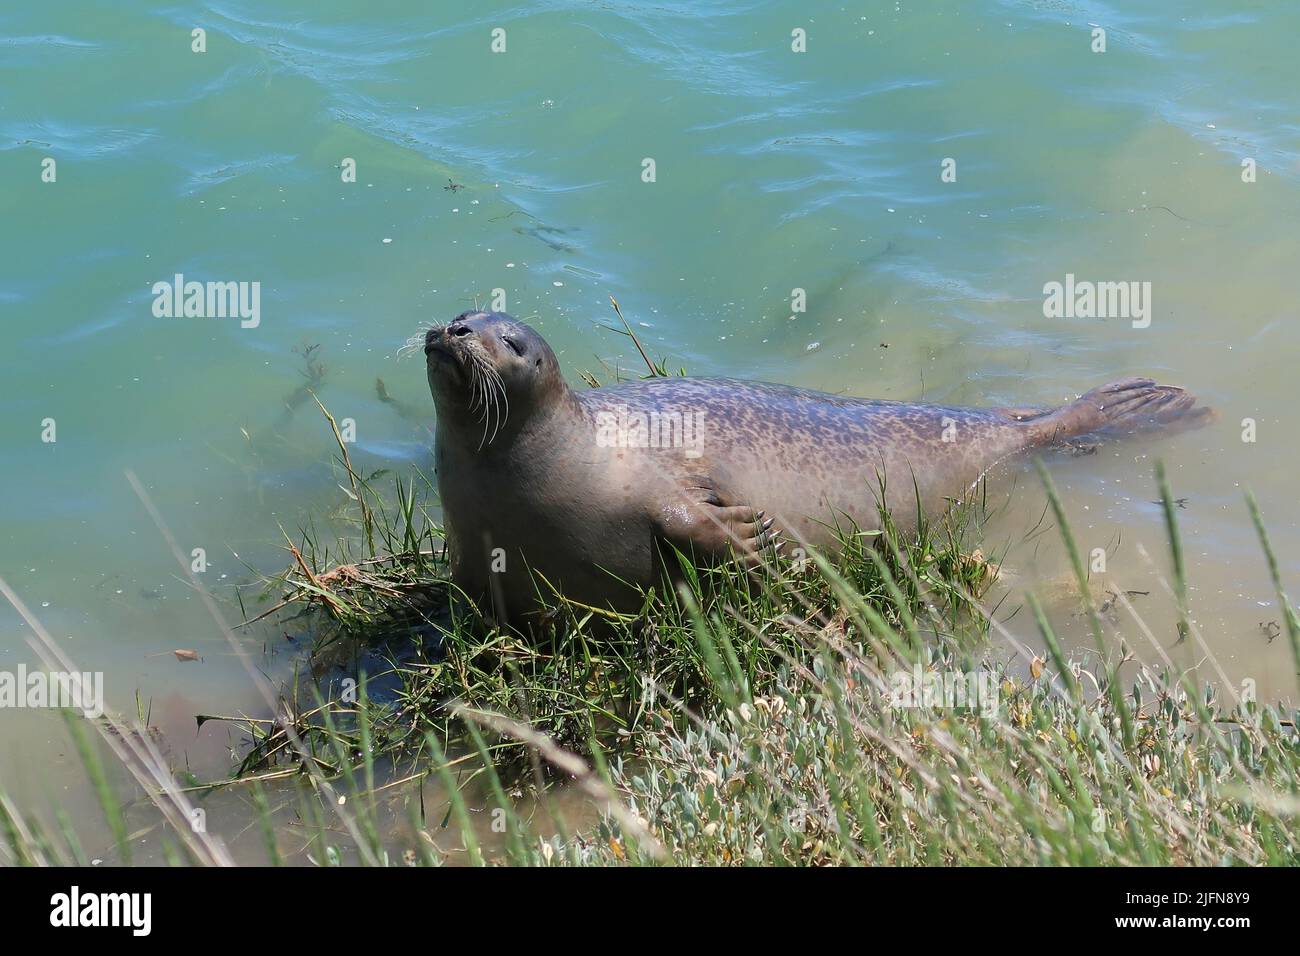 A large grey seal seen in the River Arun, West Sussex, UK. Unusual location 3 miles inland from the sea, but well known locally for several years. Stock Photo